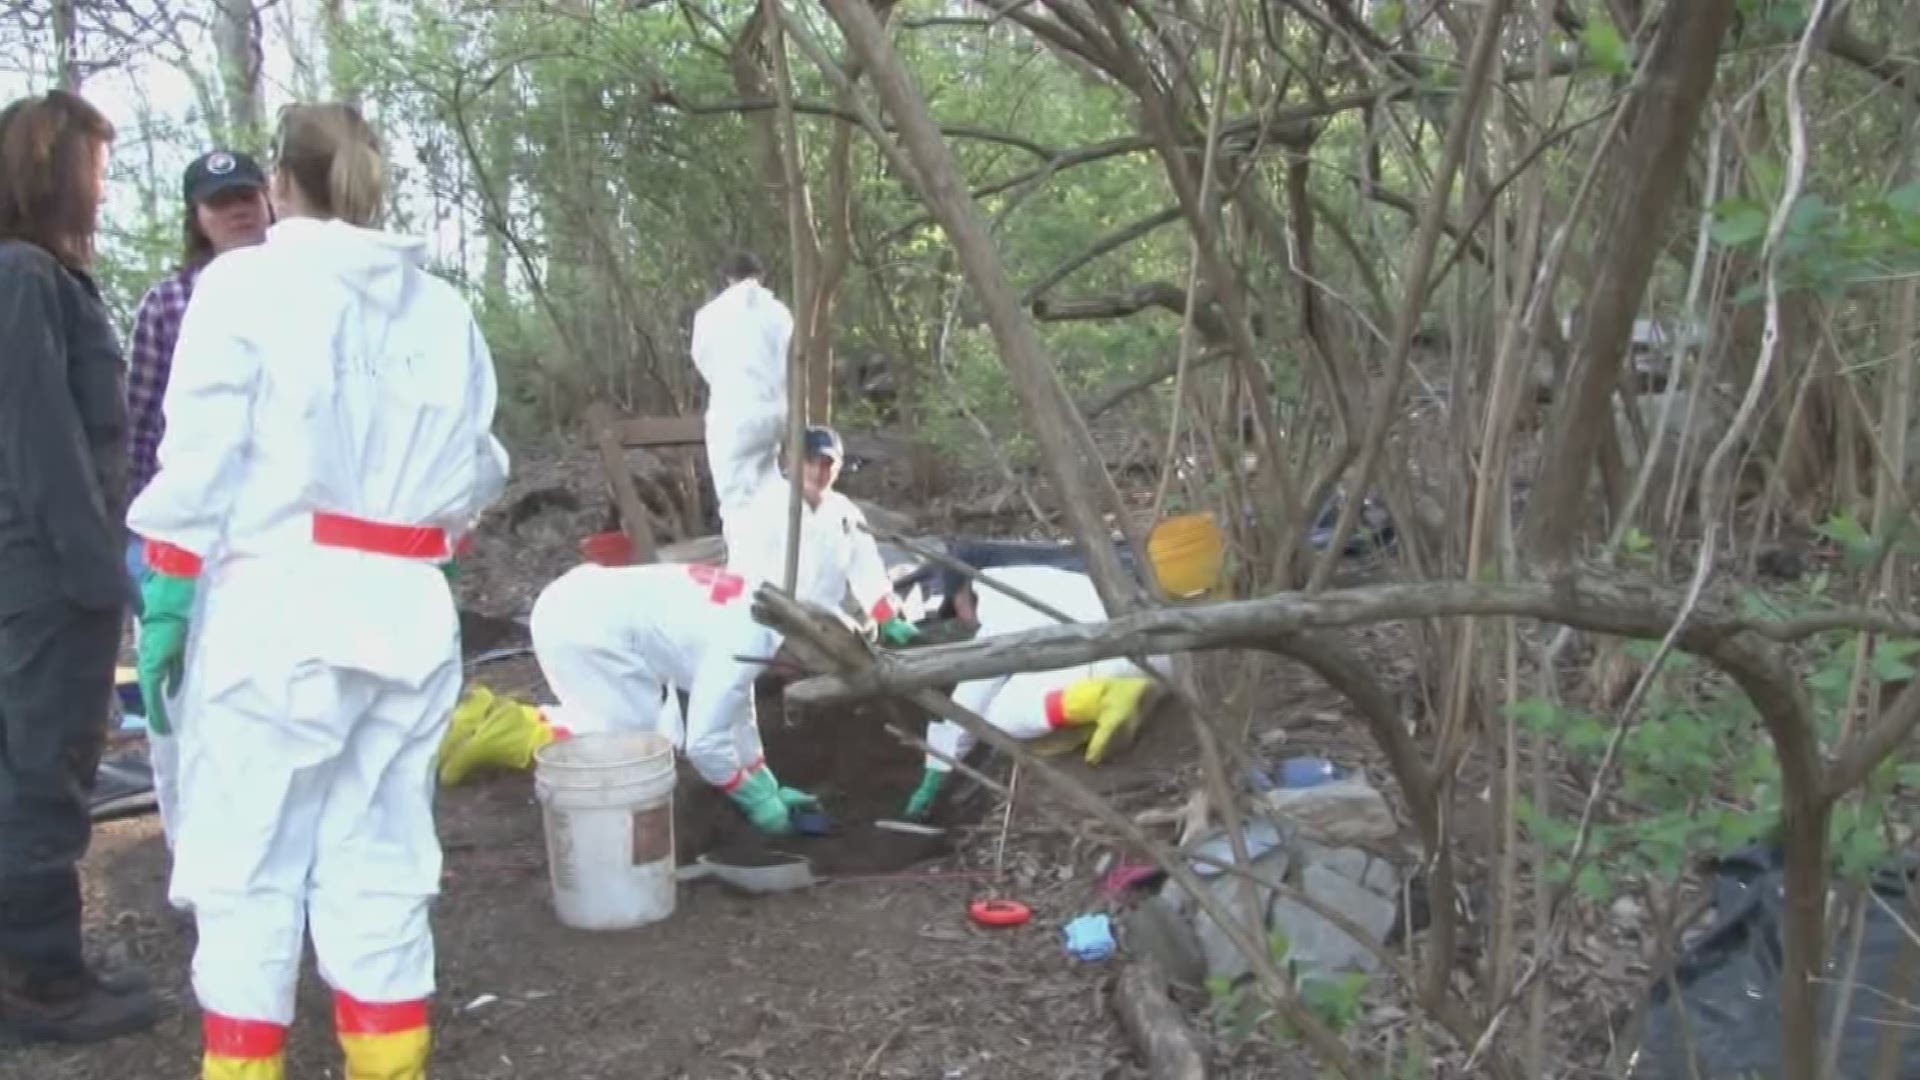 The University of Tennessee's Body Farm is welcoming law enforcement from across the country to teach them about recovering and identifying human bodies.